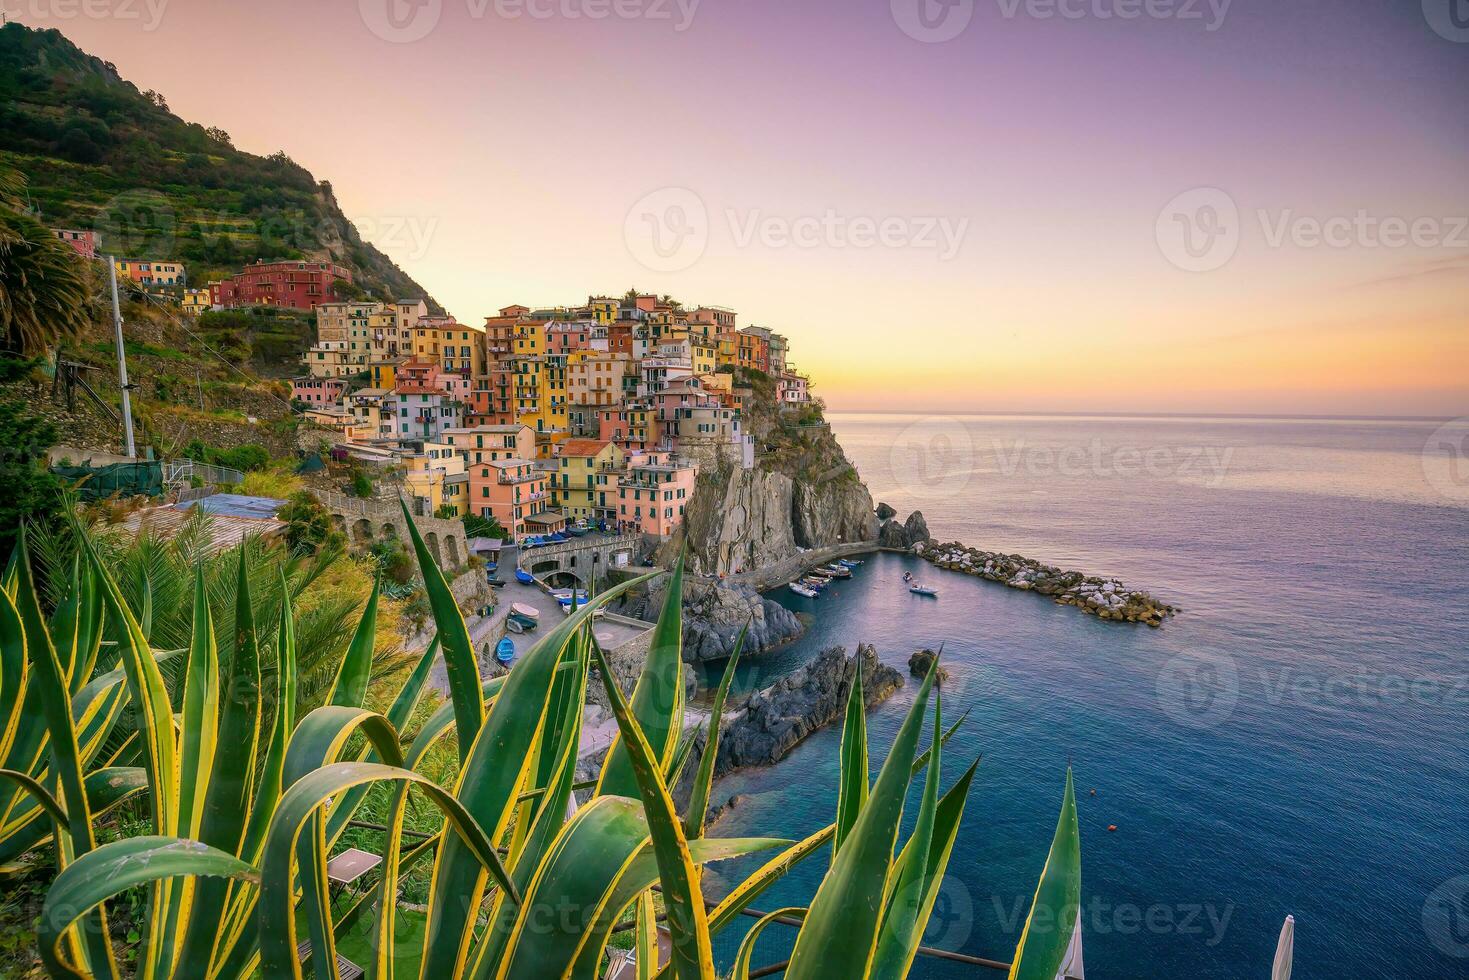 Colorful cityscape of buildings over Mediterranean sea, Europe, Cinque Terre in Italy photo